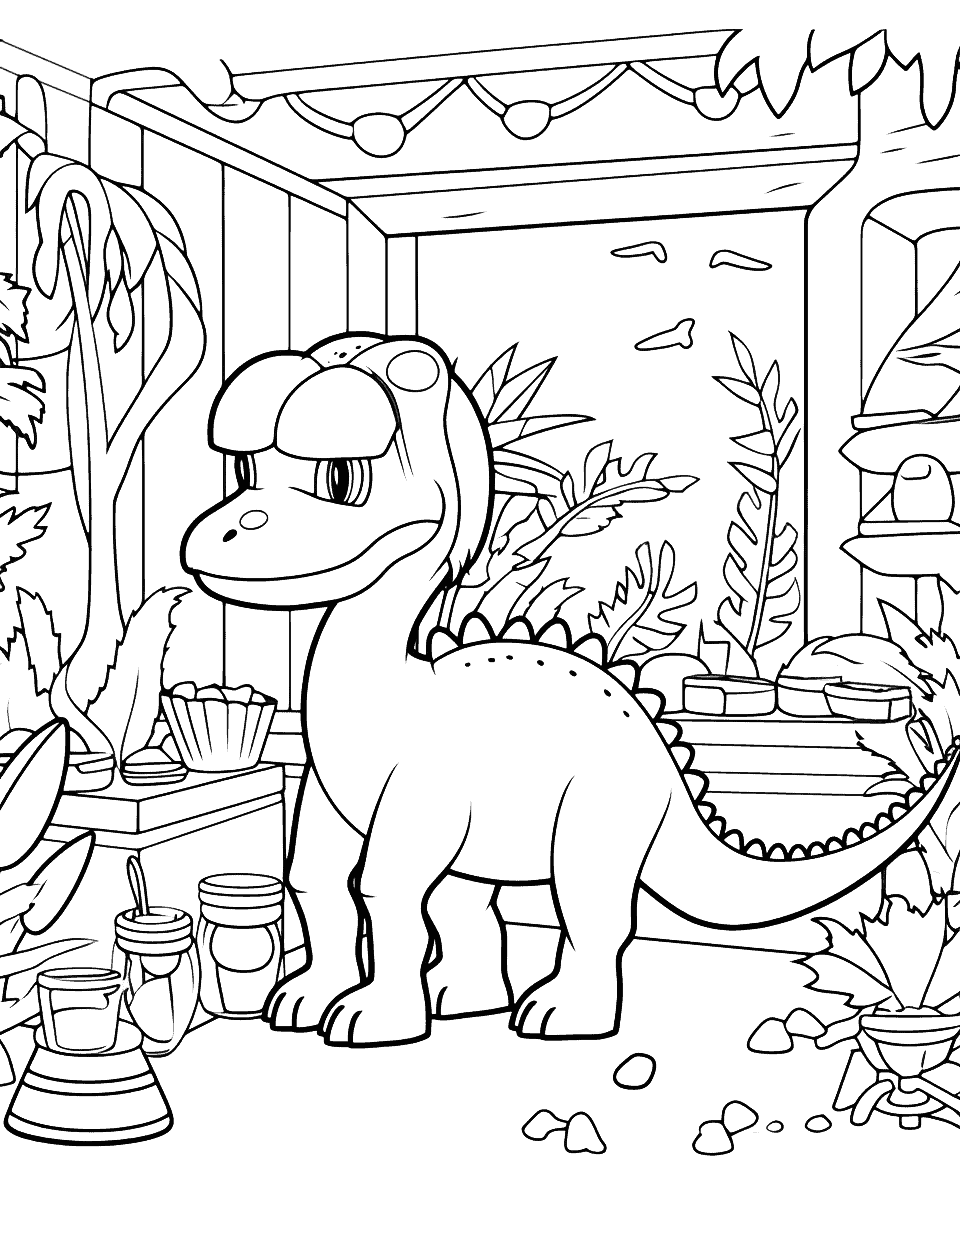 Jurassic World Lab Coloring Page - The laboratory where dinosaurs are created in Jurassic World.